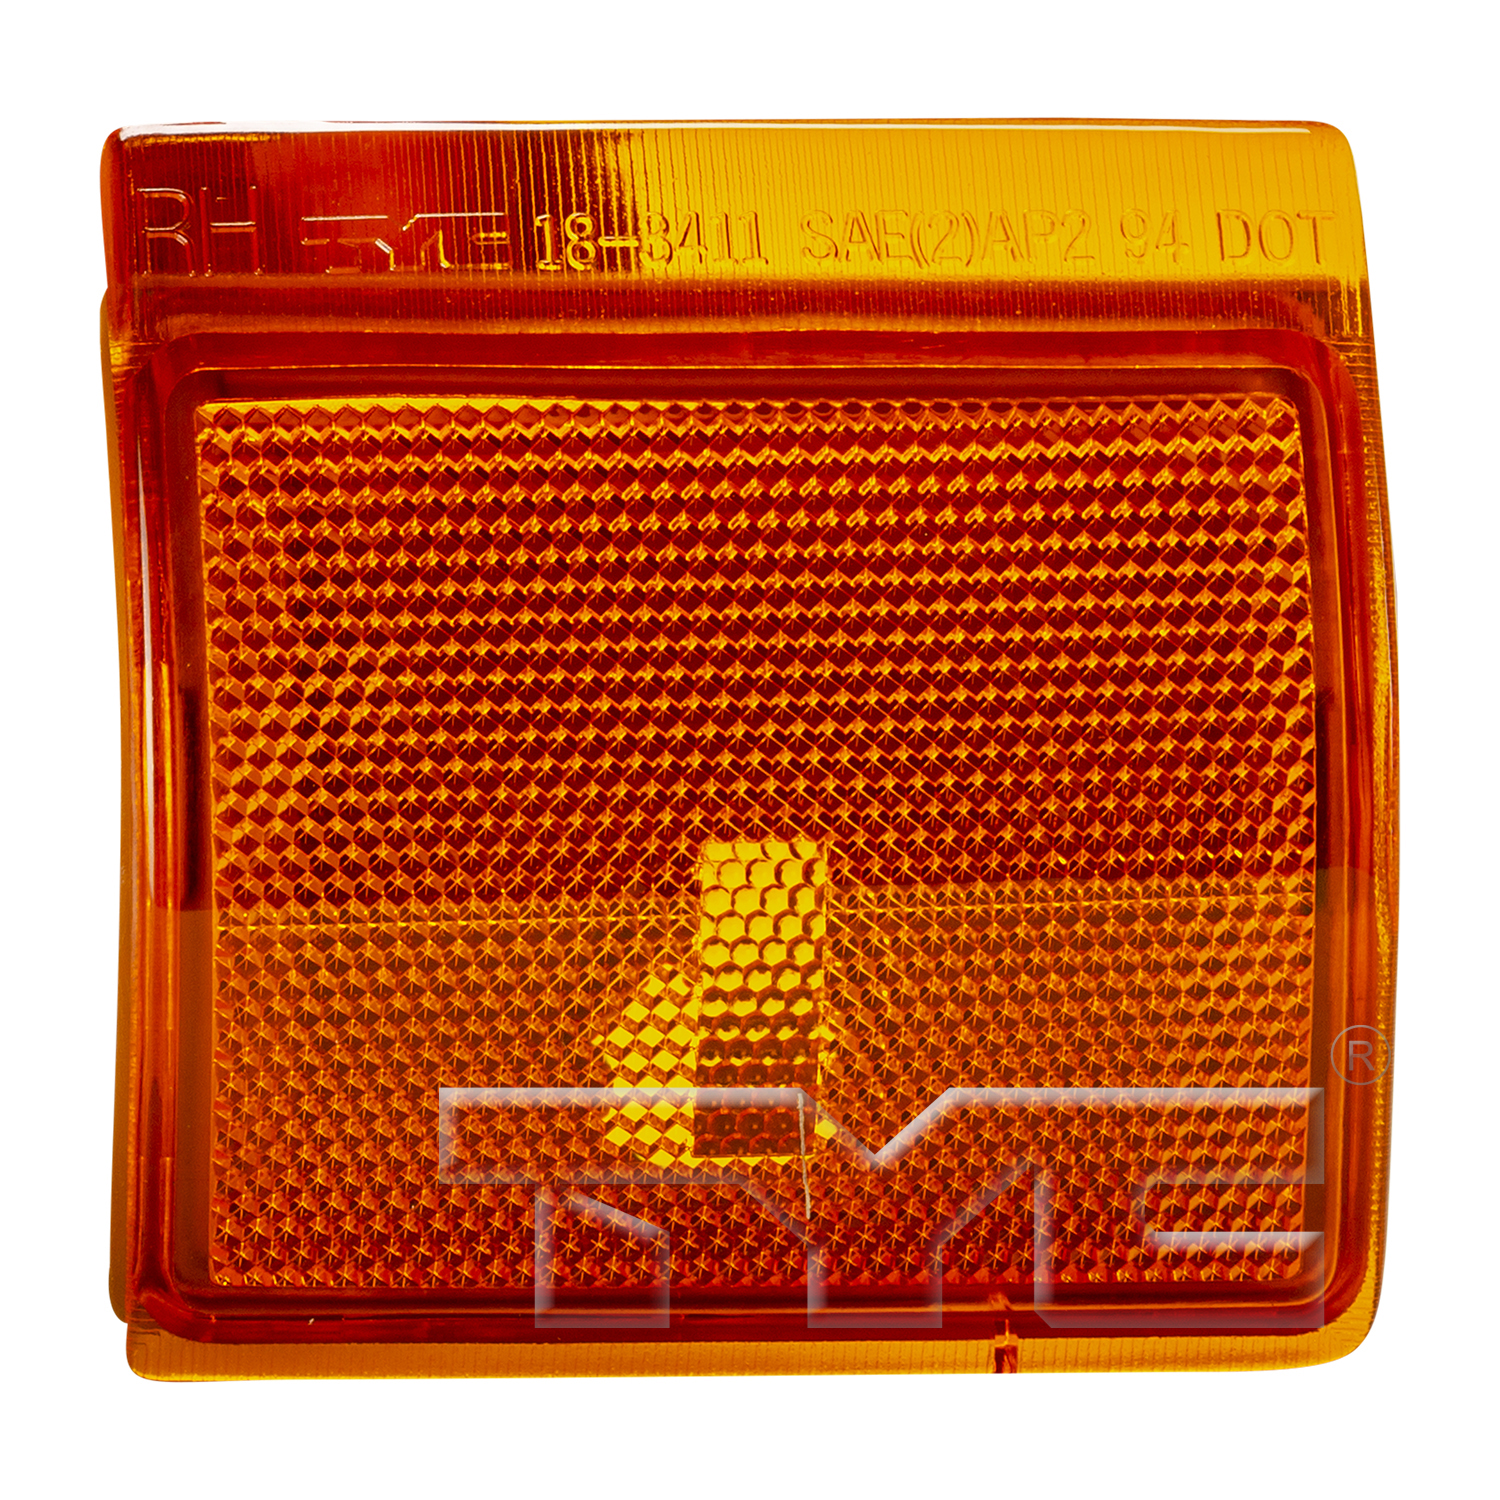 Aftermarket LAMPS for GMC - C2500 SUBURBAN, C2500 SUBURBAN,94-99,RT Front marker lamp assy